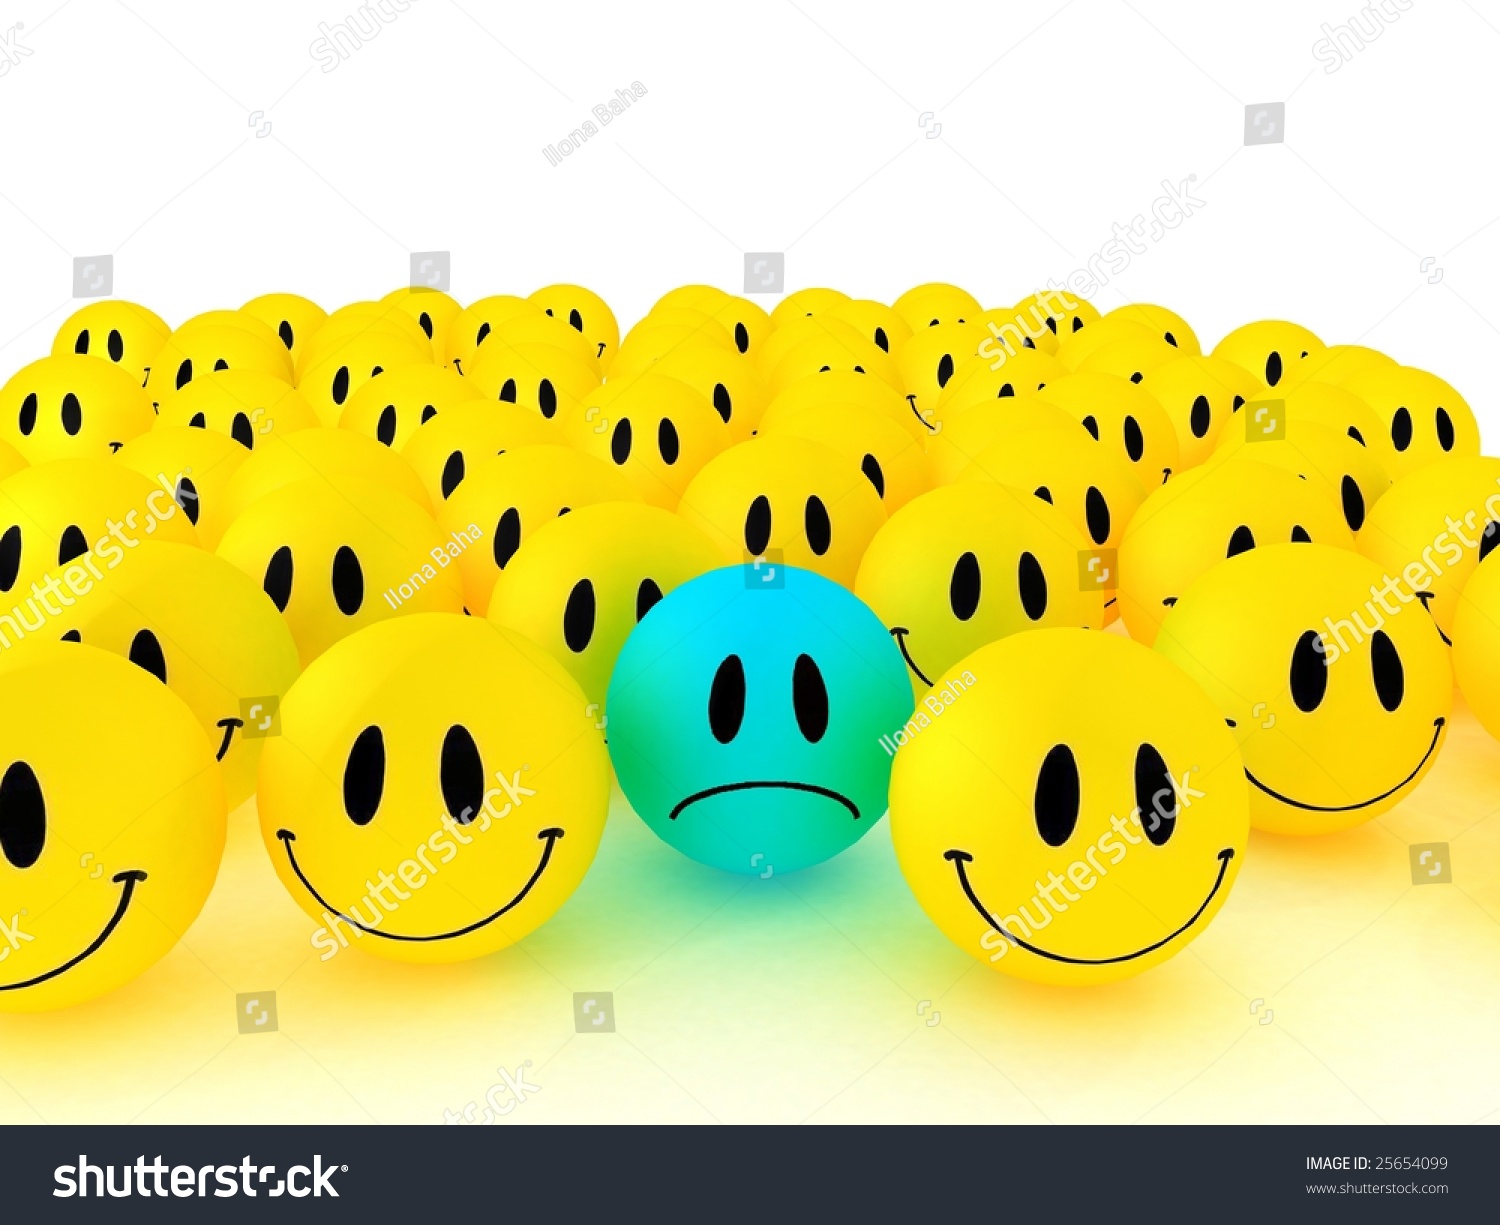 Happy Faces Group. 3d Rendering Stock Photo 25654099 : Shutterstock